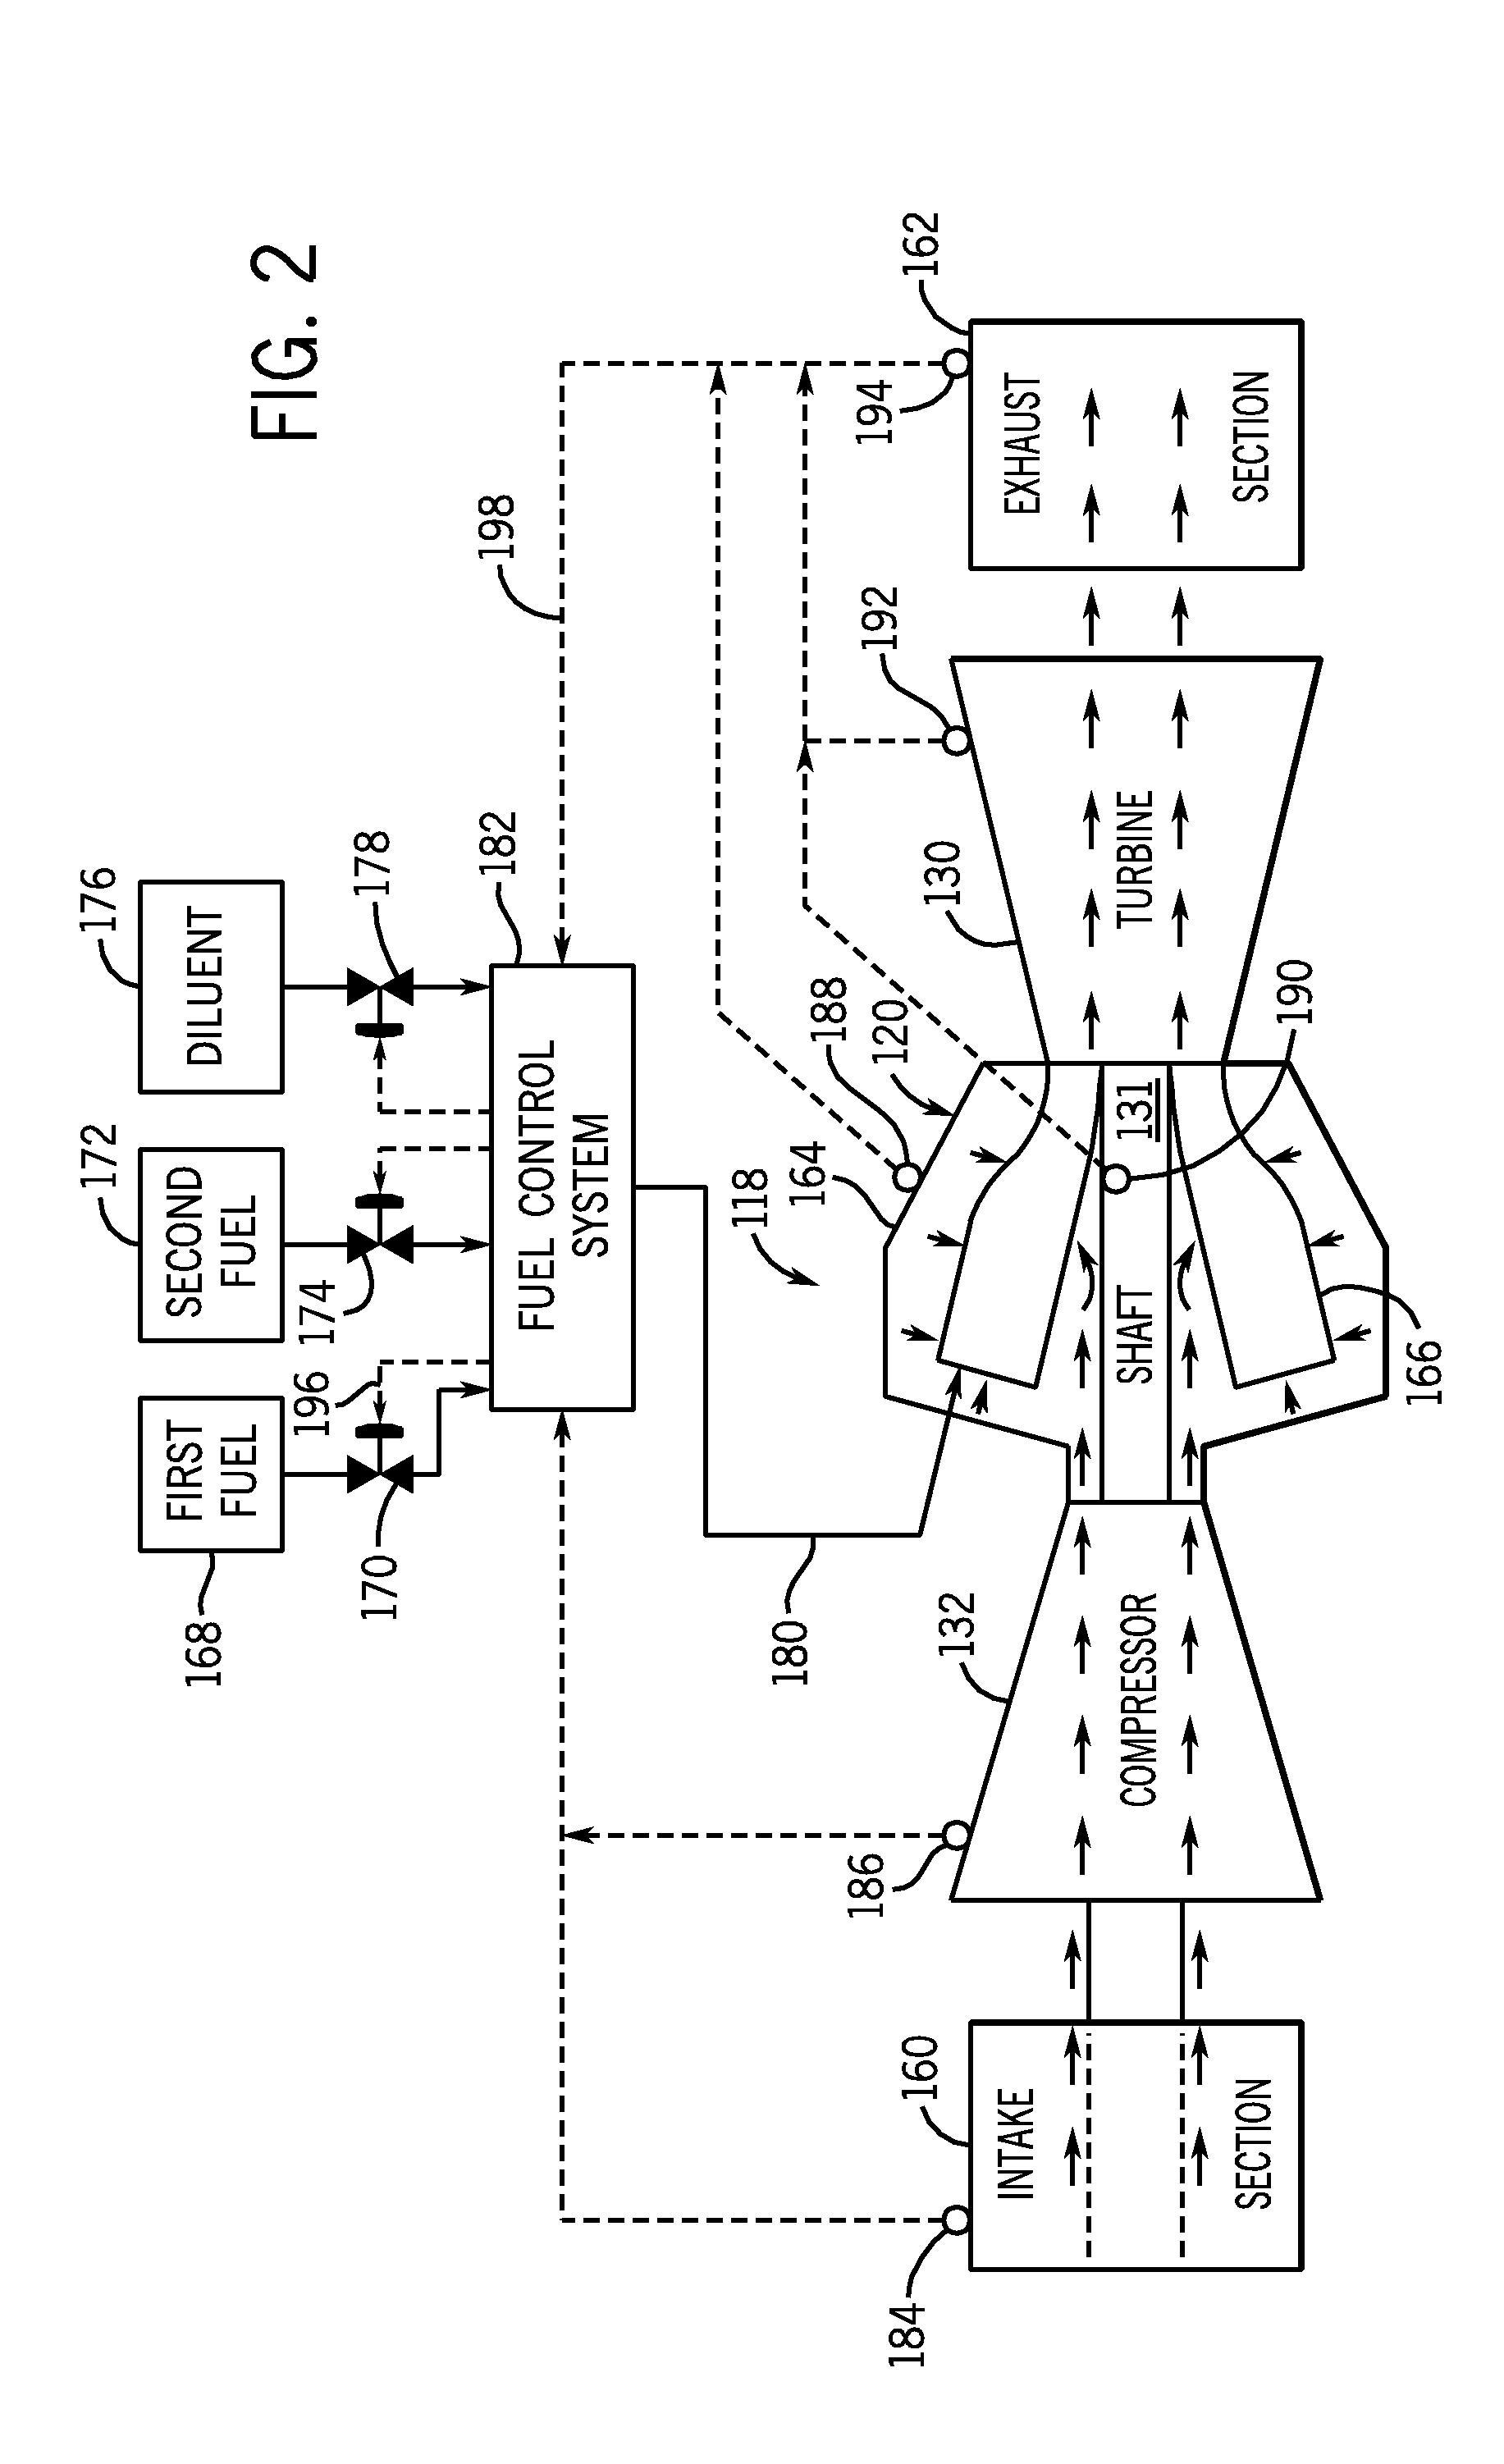 System for fuel and diluent control